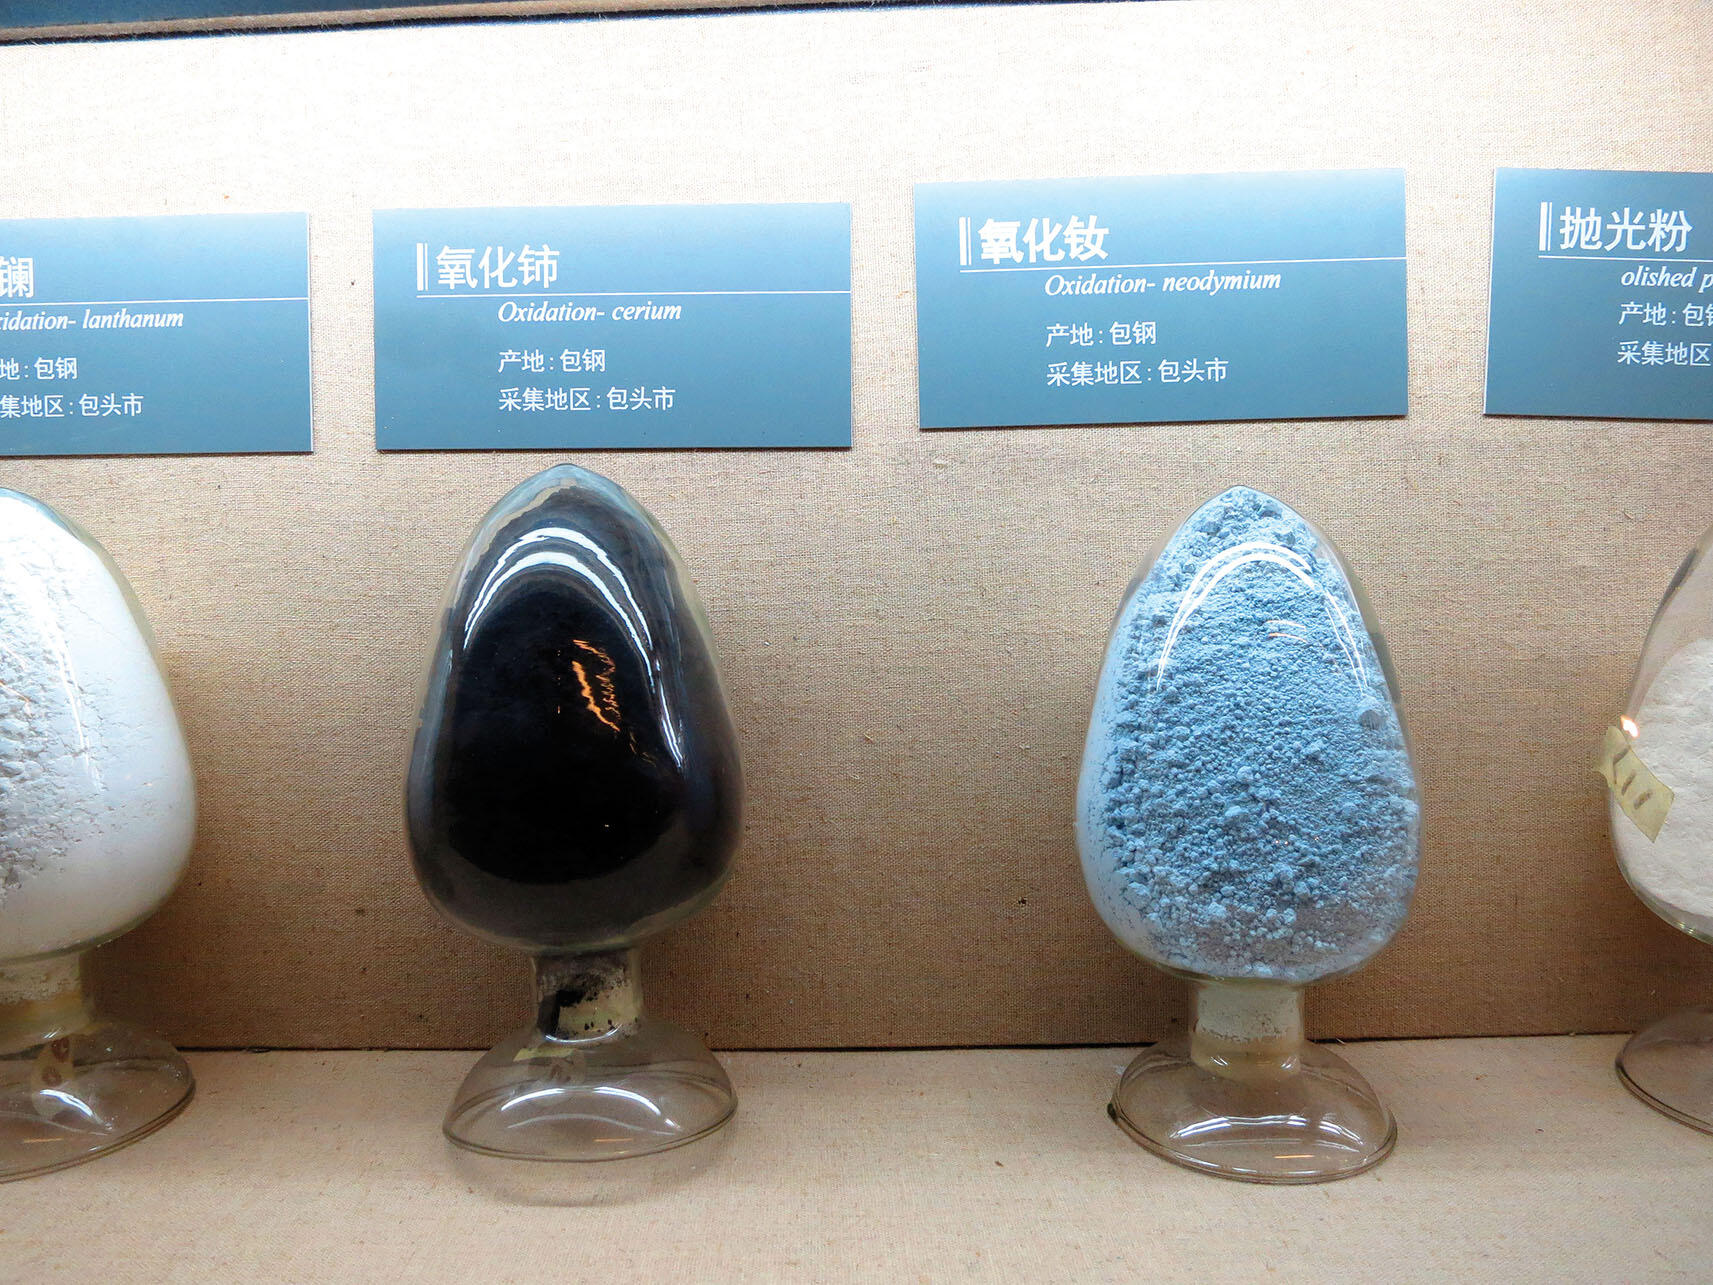 Small glass eggs filled with powdery rare earth ores on display in the Inner Mongolia Autonomous Region Museum, Hohhot, China. (Photo by Julie Klinger.)